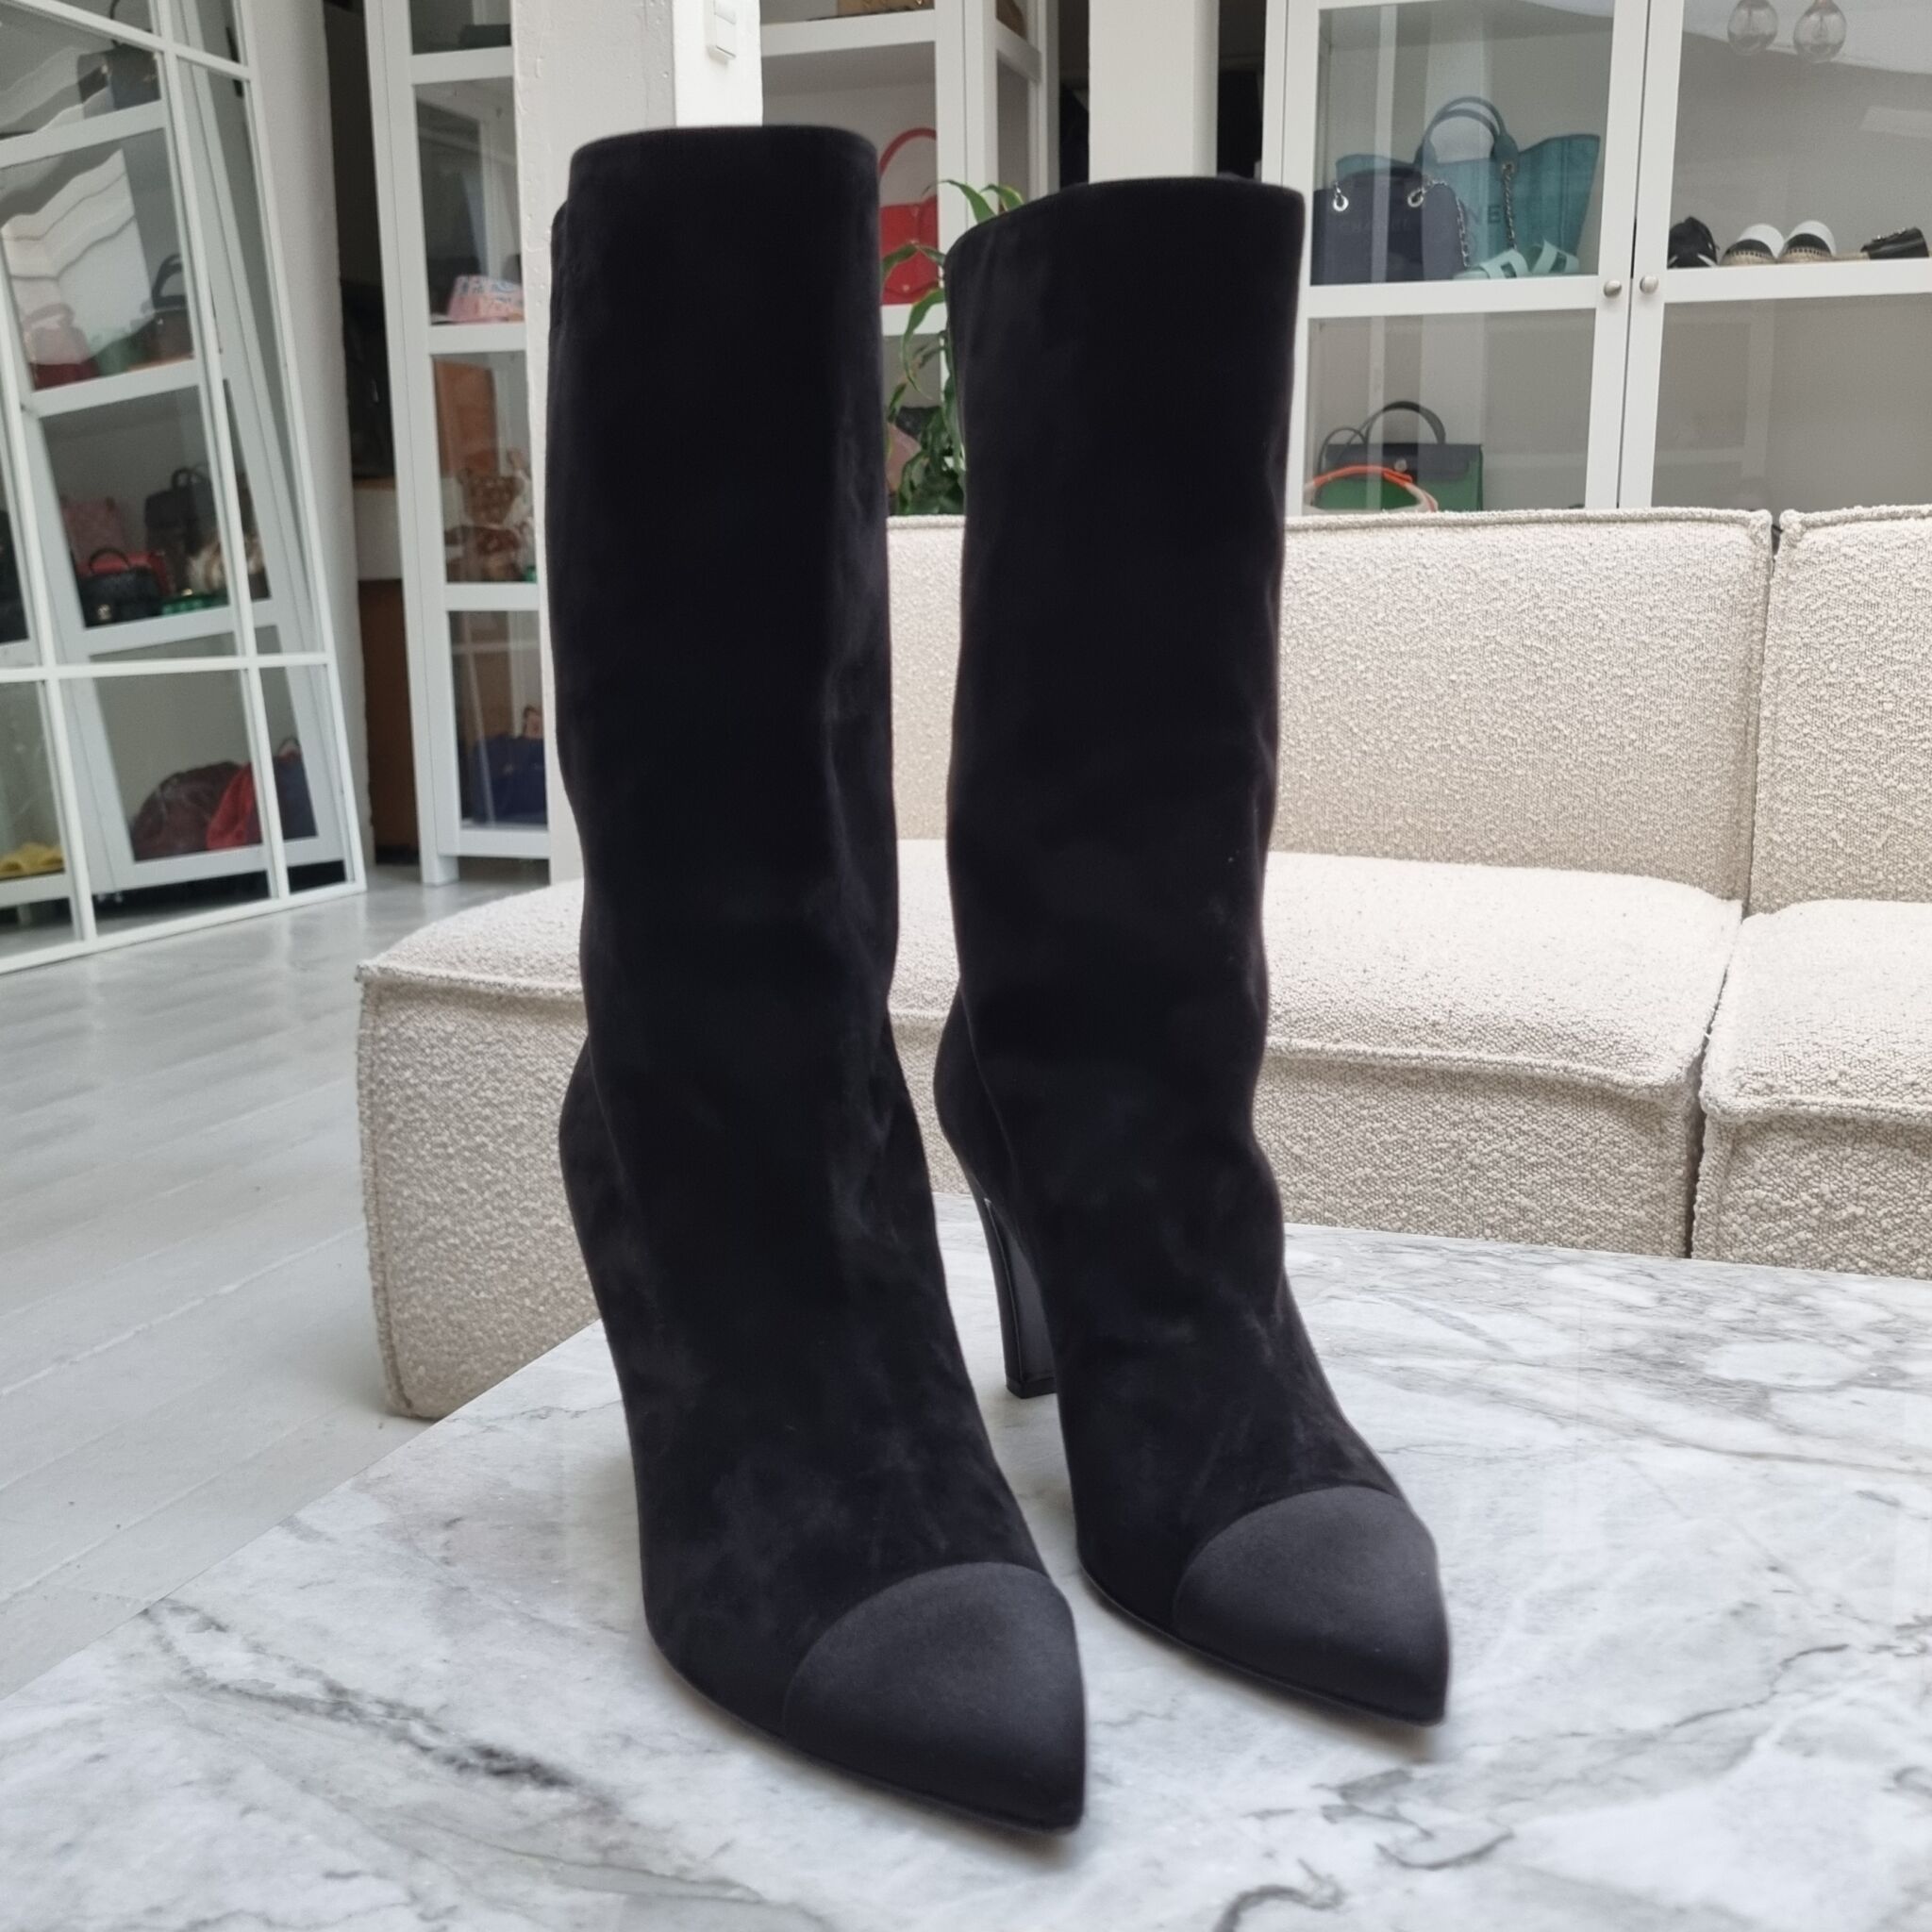 Coco Gabrielle Boots, Suede, Sort, Laulay